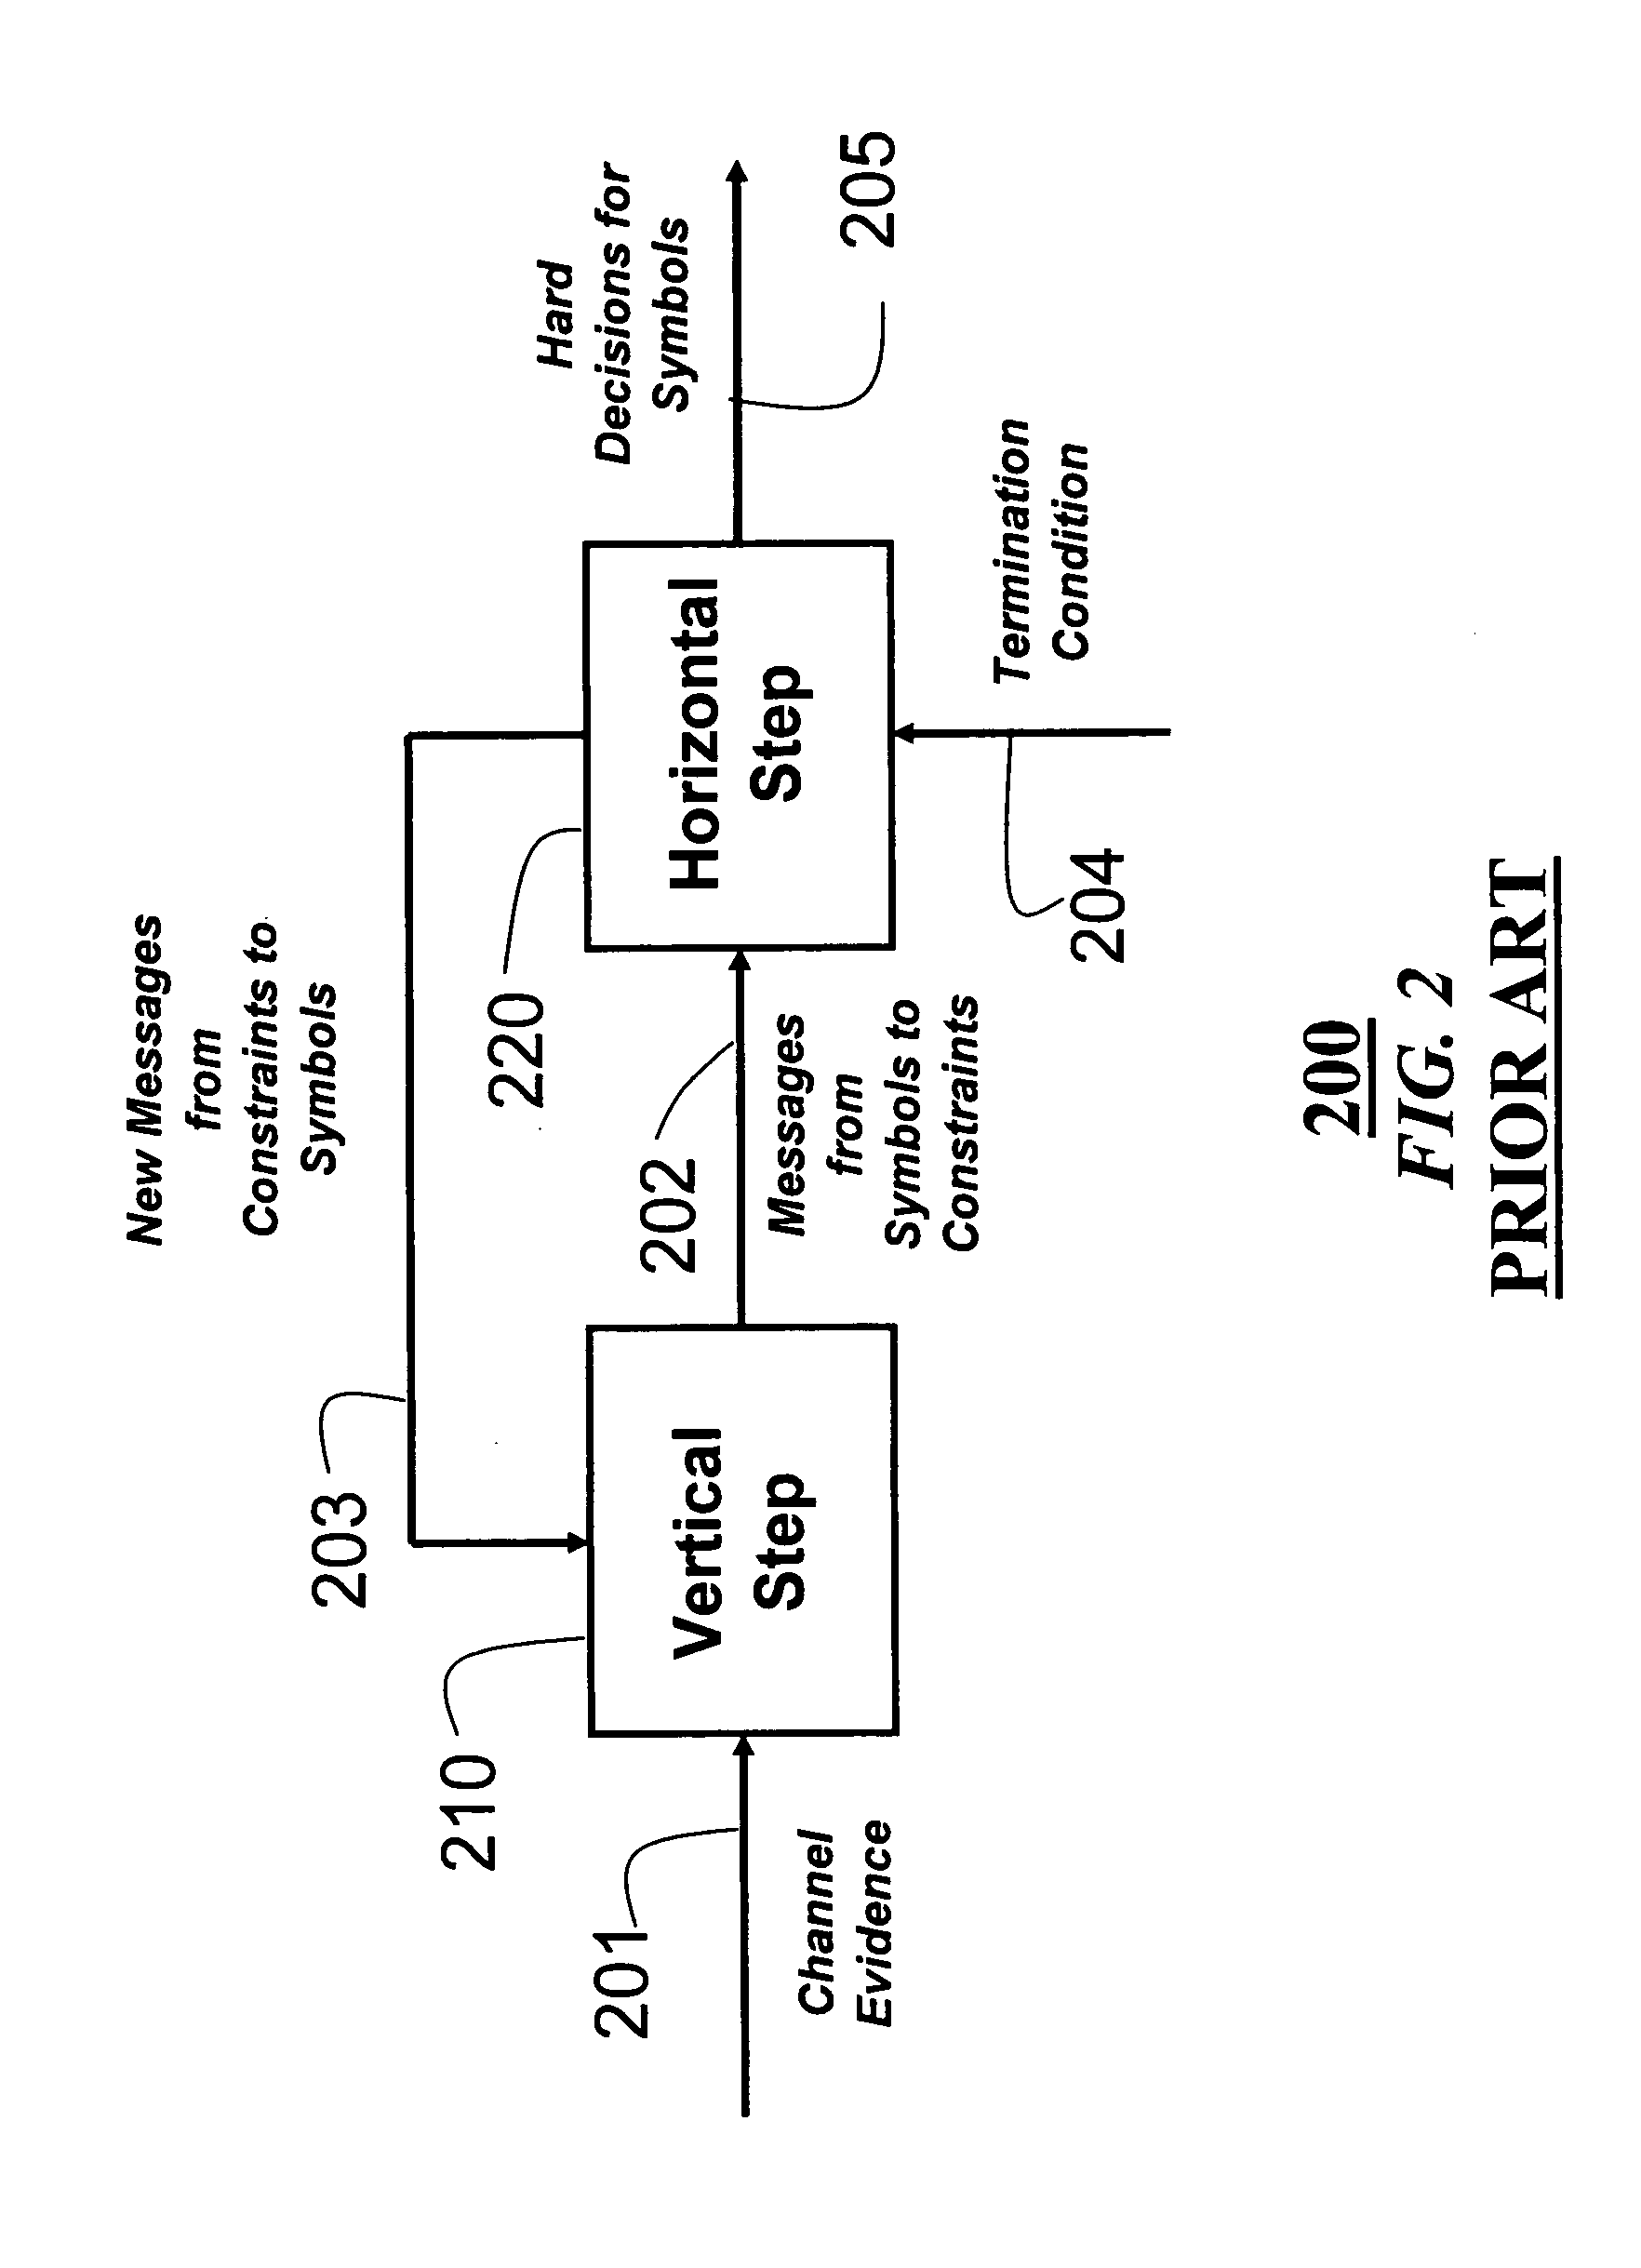 Method and system for replica group-shuffled iterative decoding of quasi-cyclic low-density parity check codes